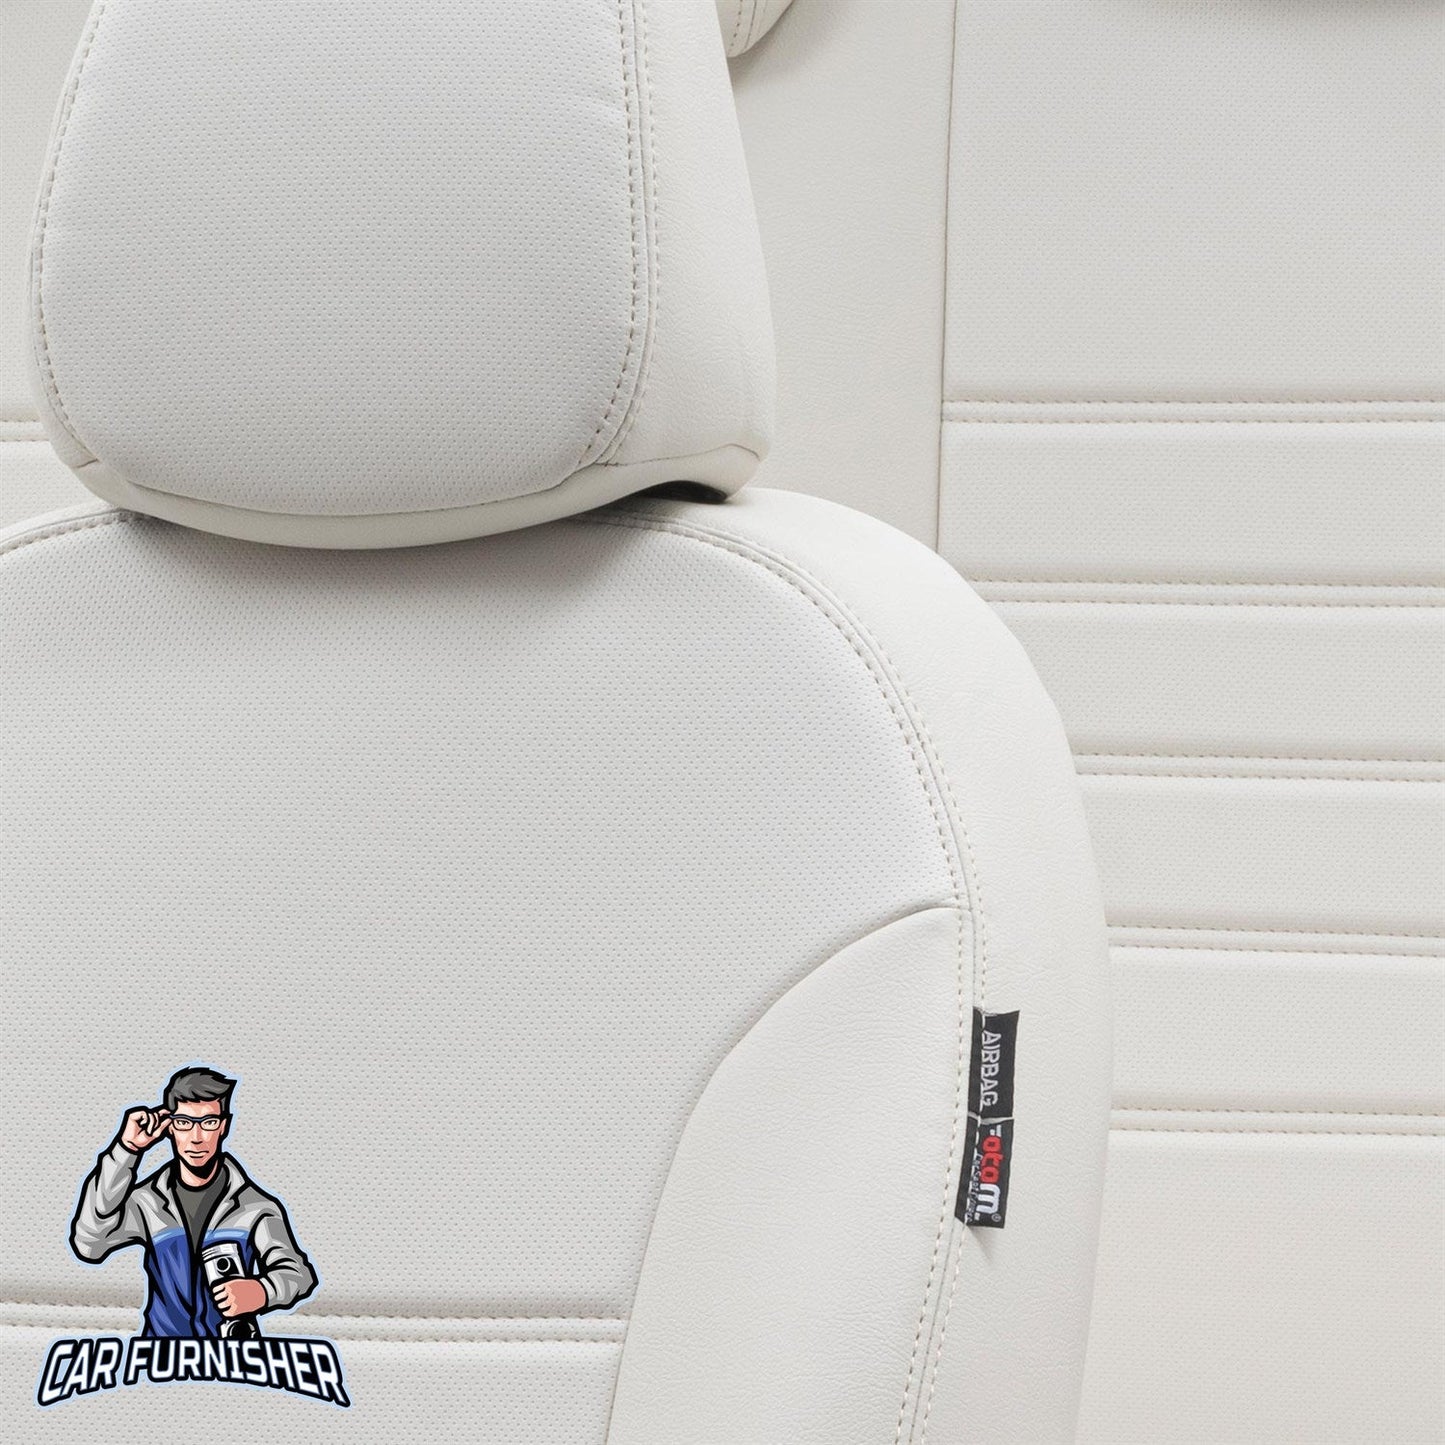 Mini Countryman Seat Covers Istanbul Leather Design Ivory Leather